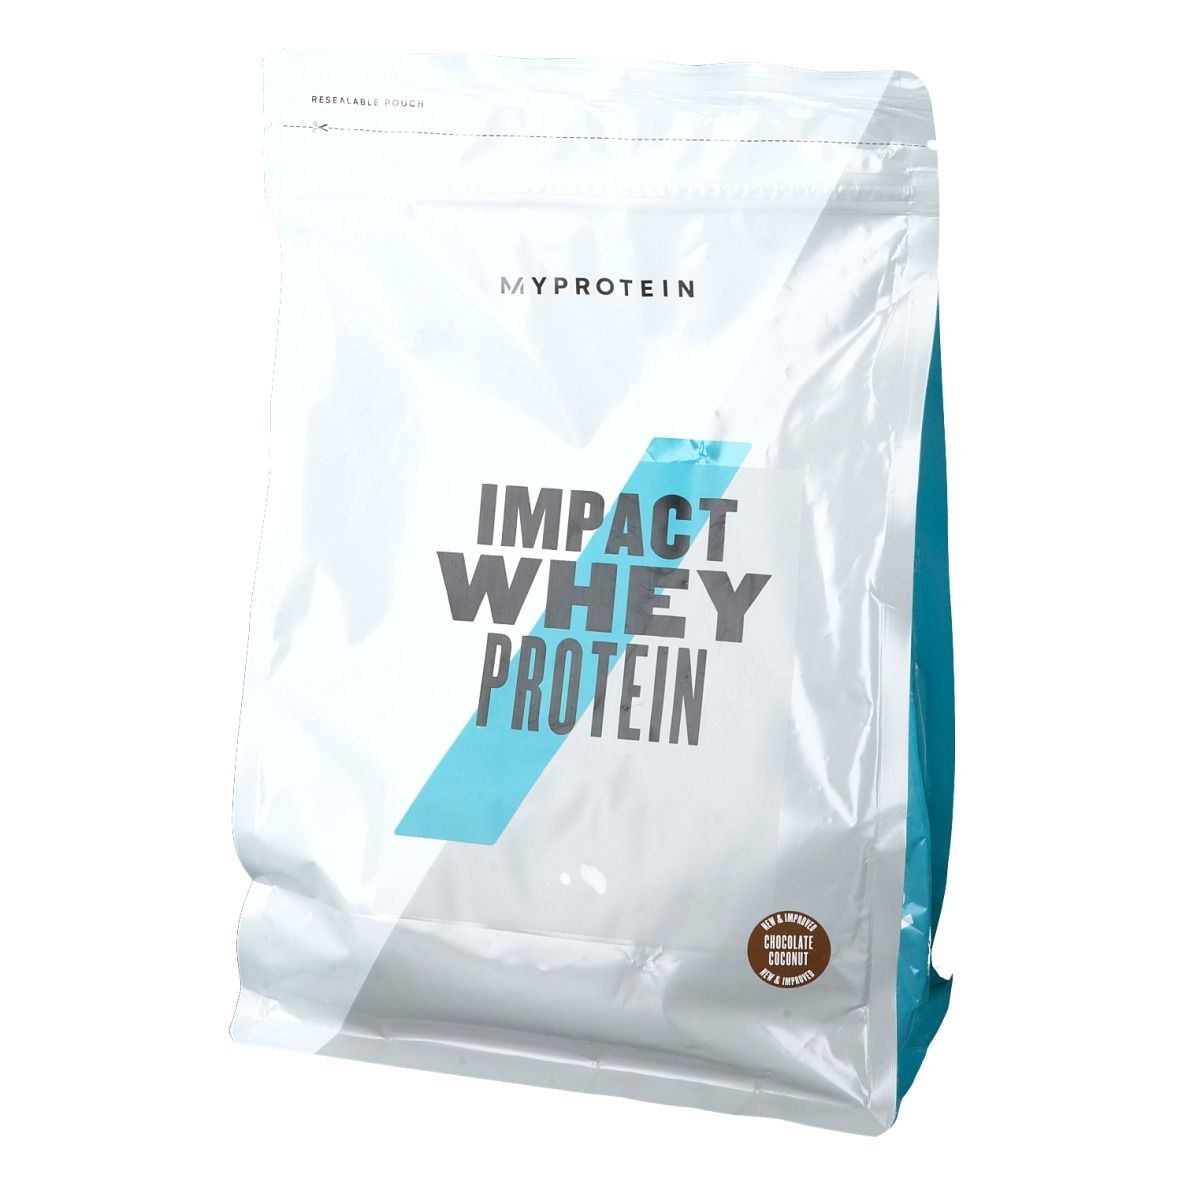 MyProtein Impact Whey Protein Chocolate & Coconut